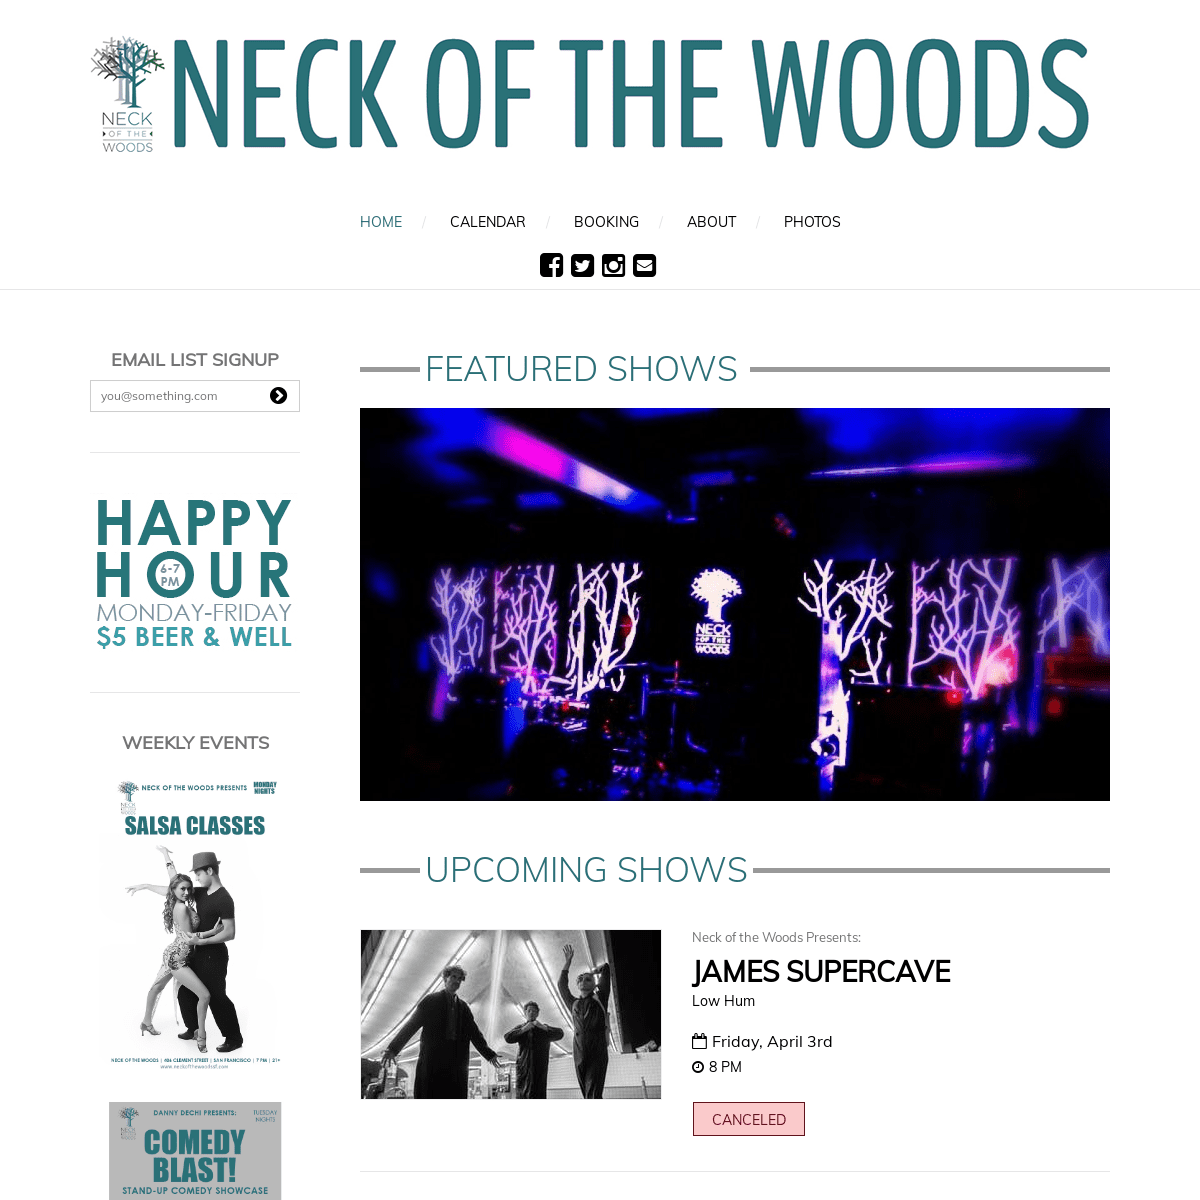 A complete backup of neckofthewoodssf.com